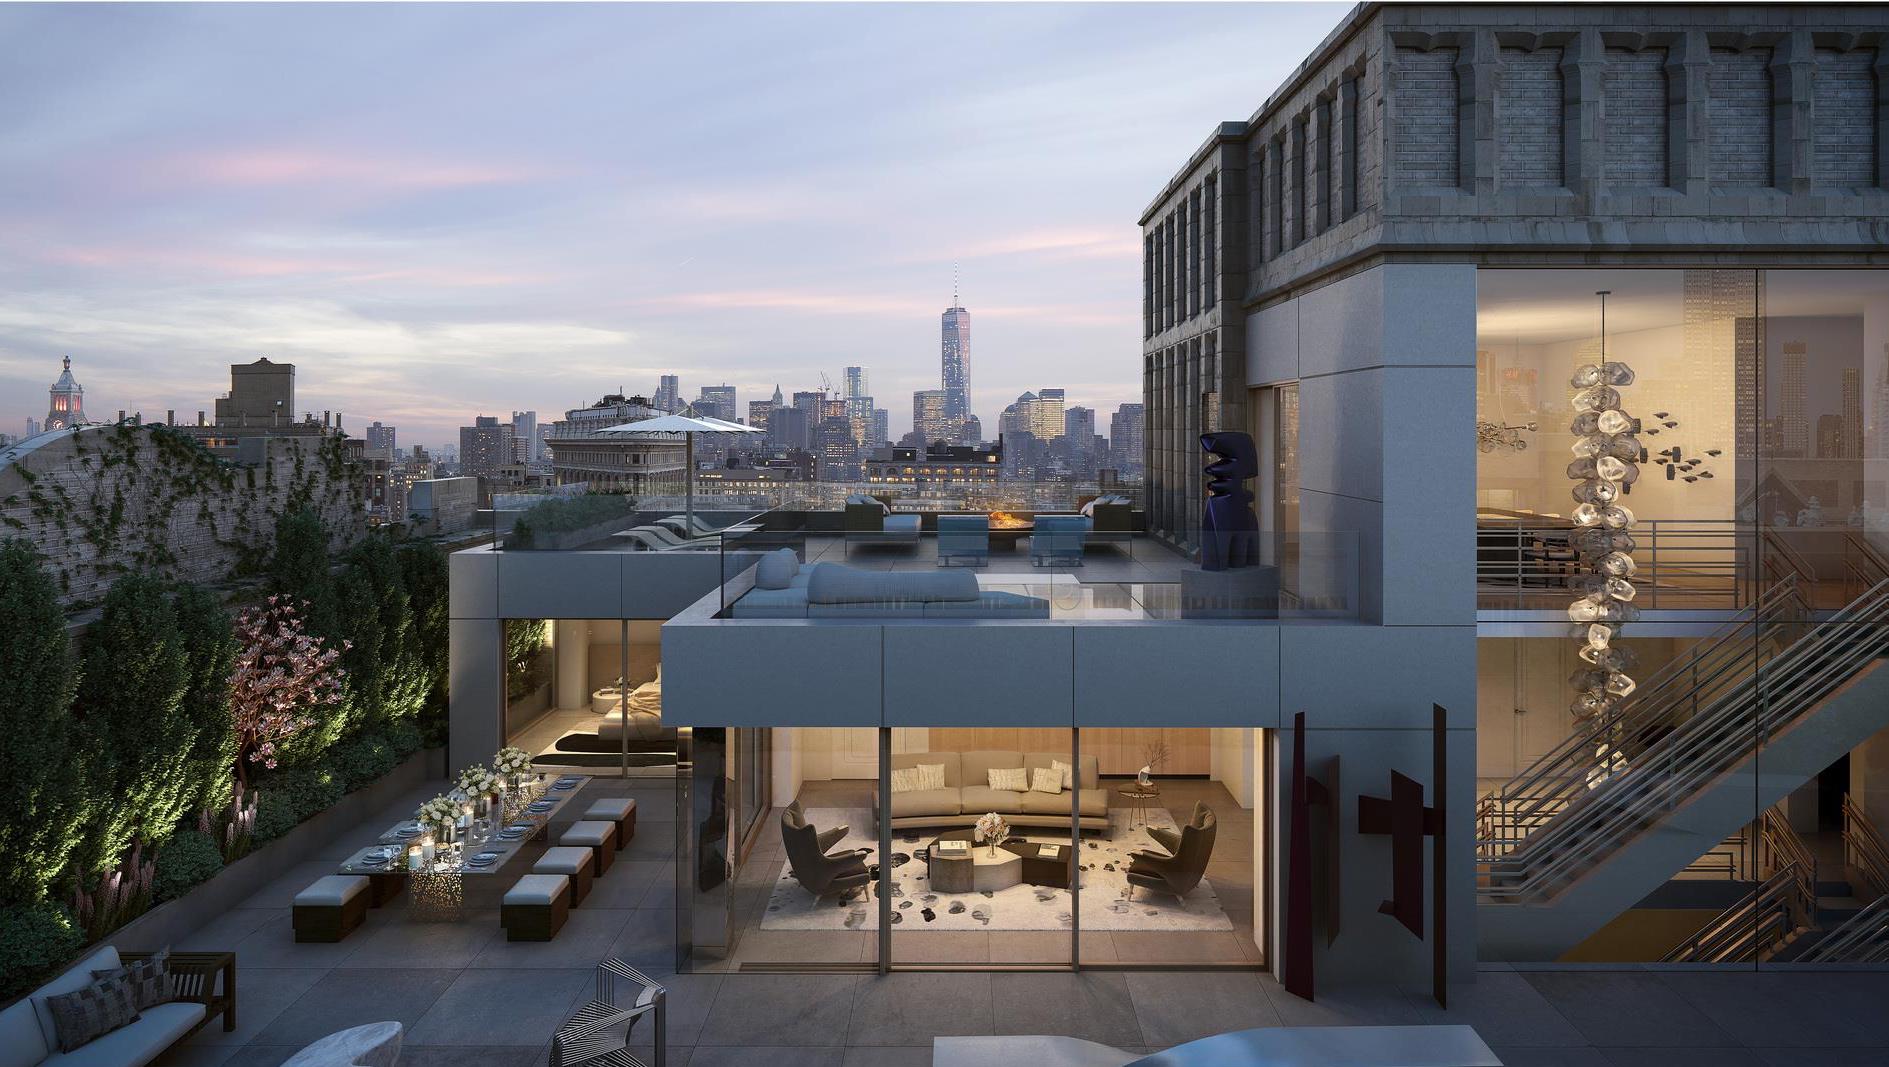 212 5th Ave penthouse